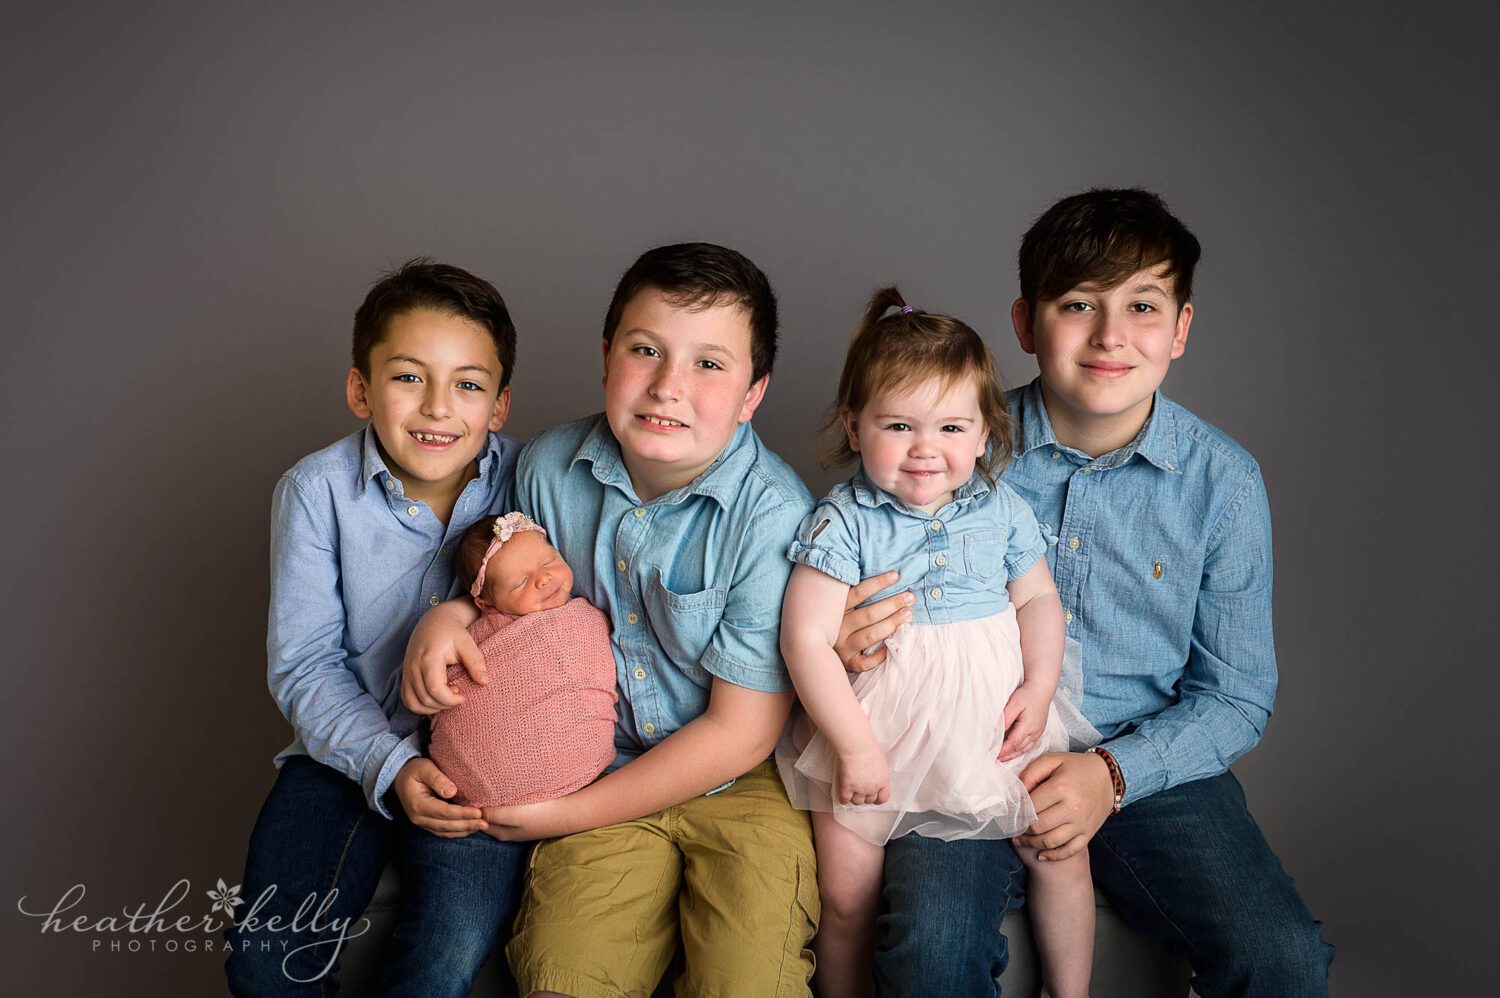 4 siblings with their newborn sister. They are sitting on a bench looking at the camera during their newborn photography session. 